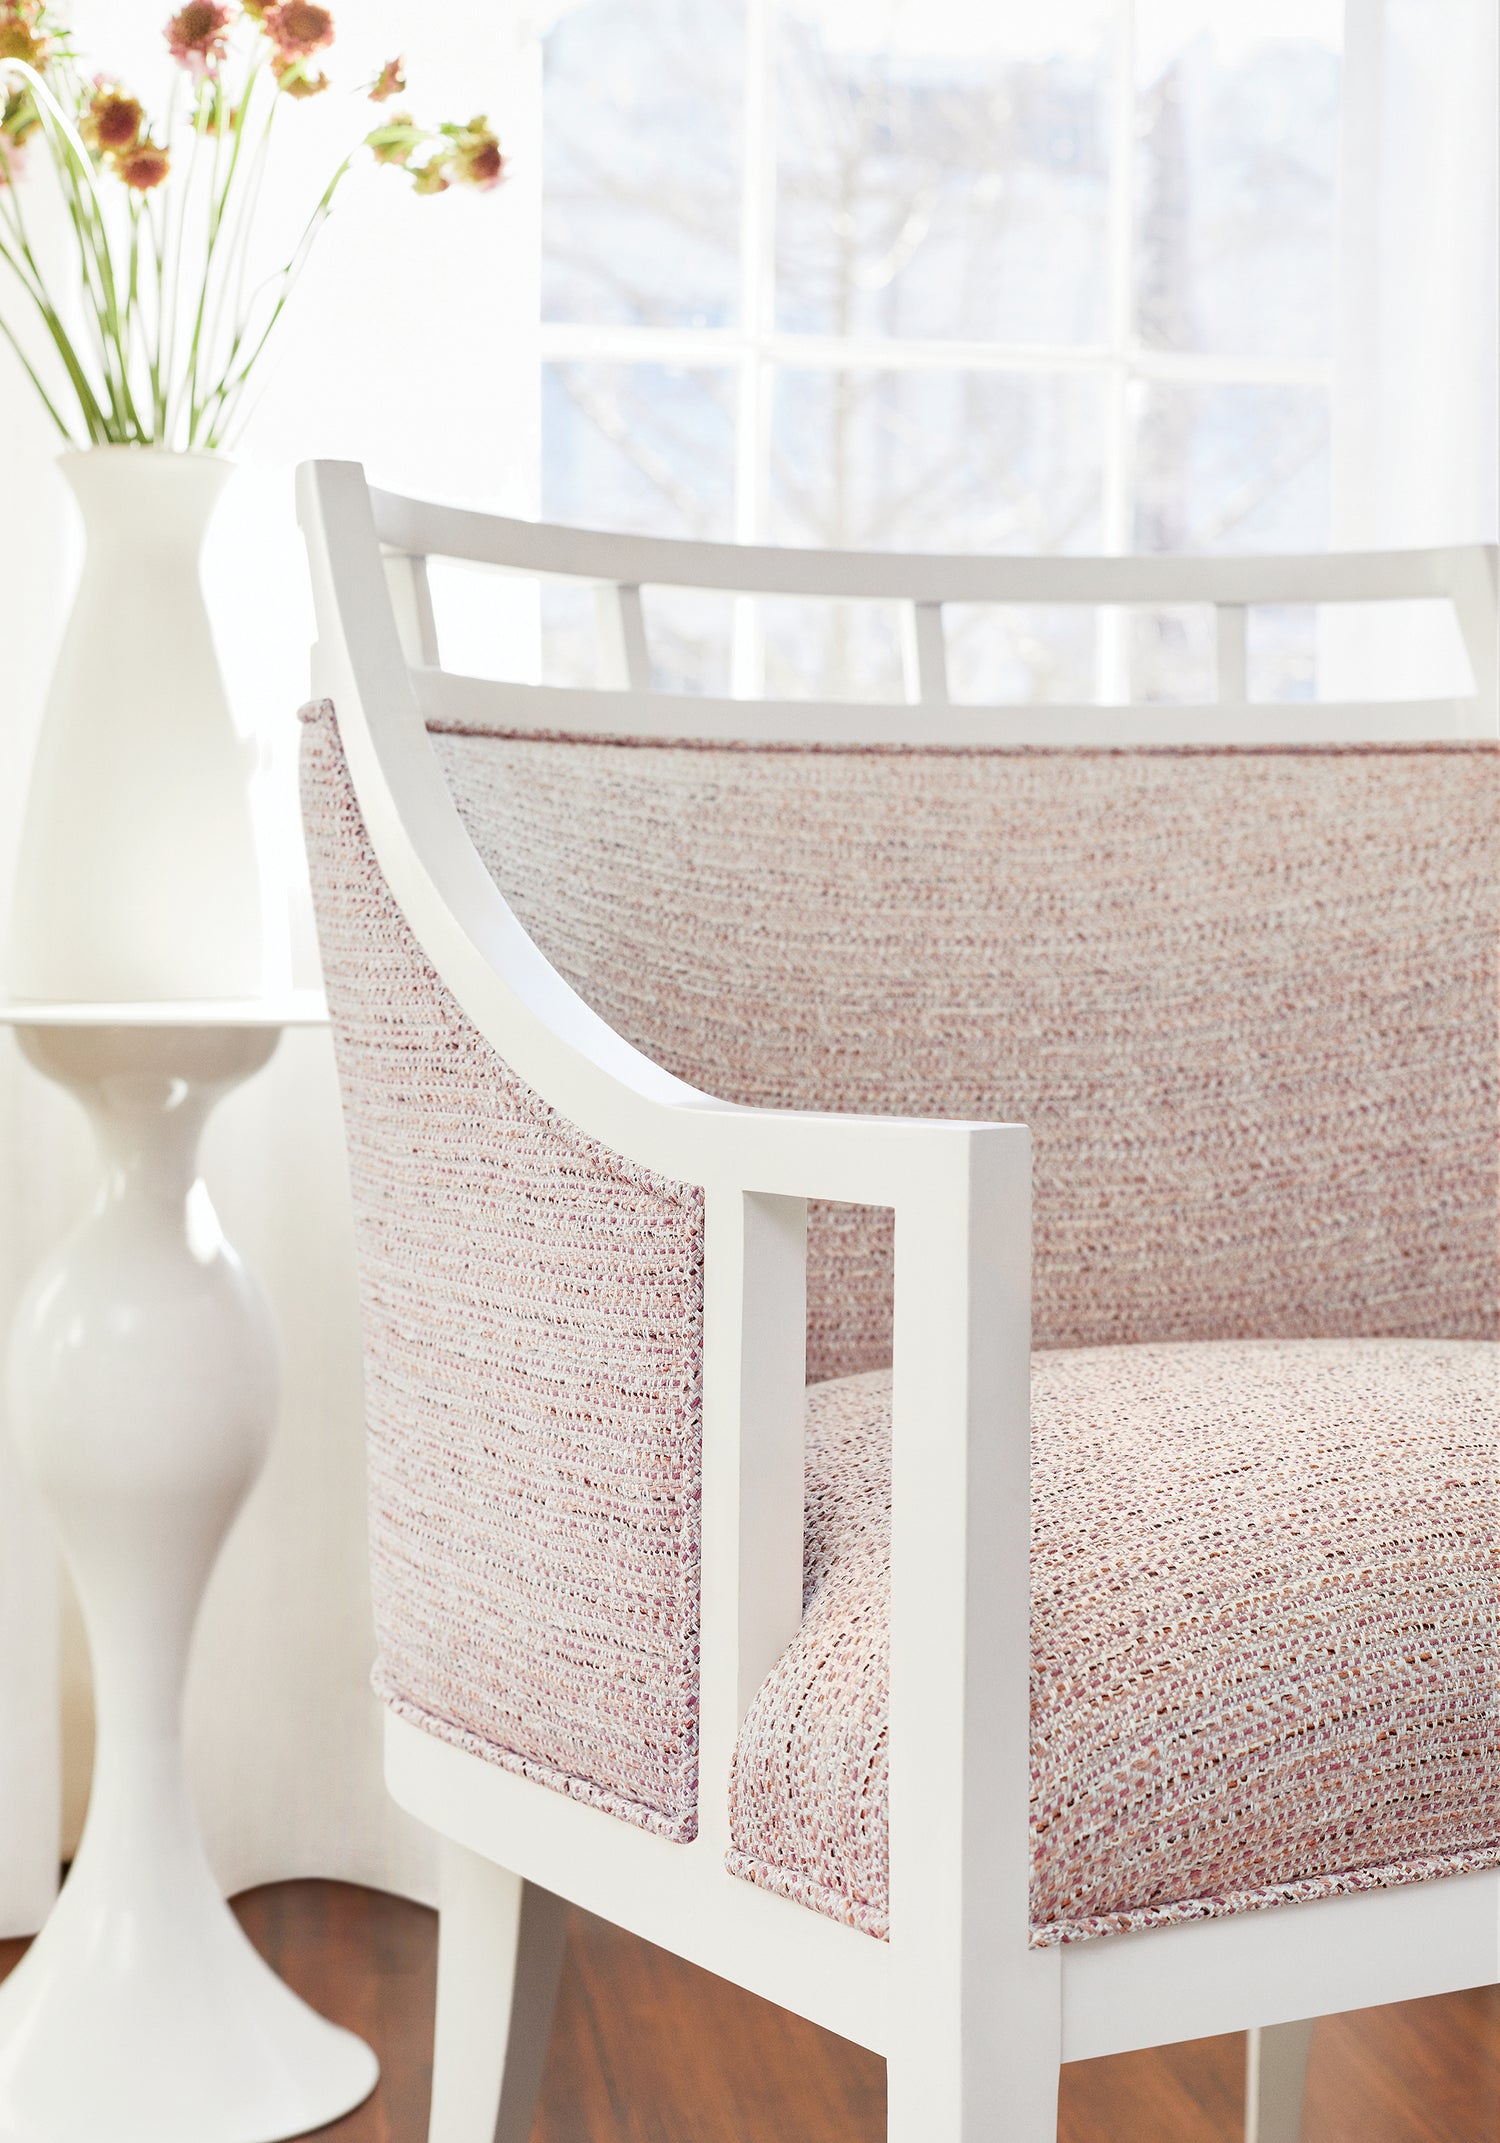 Closeup of Malibu Chair in Thibaut Elements woven fabric in Blush color - pattern number W75246